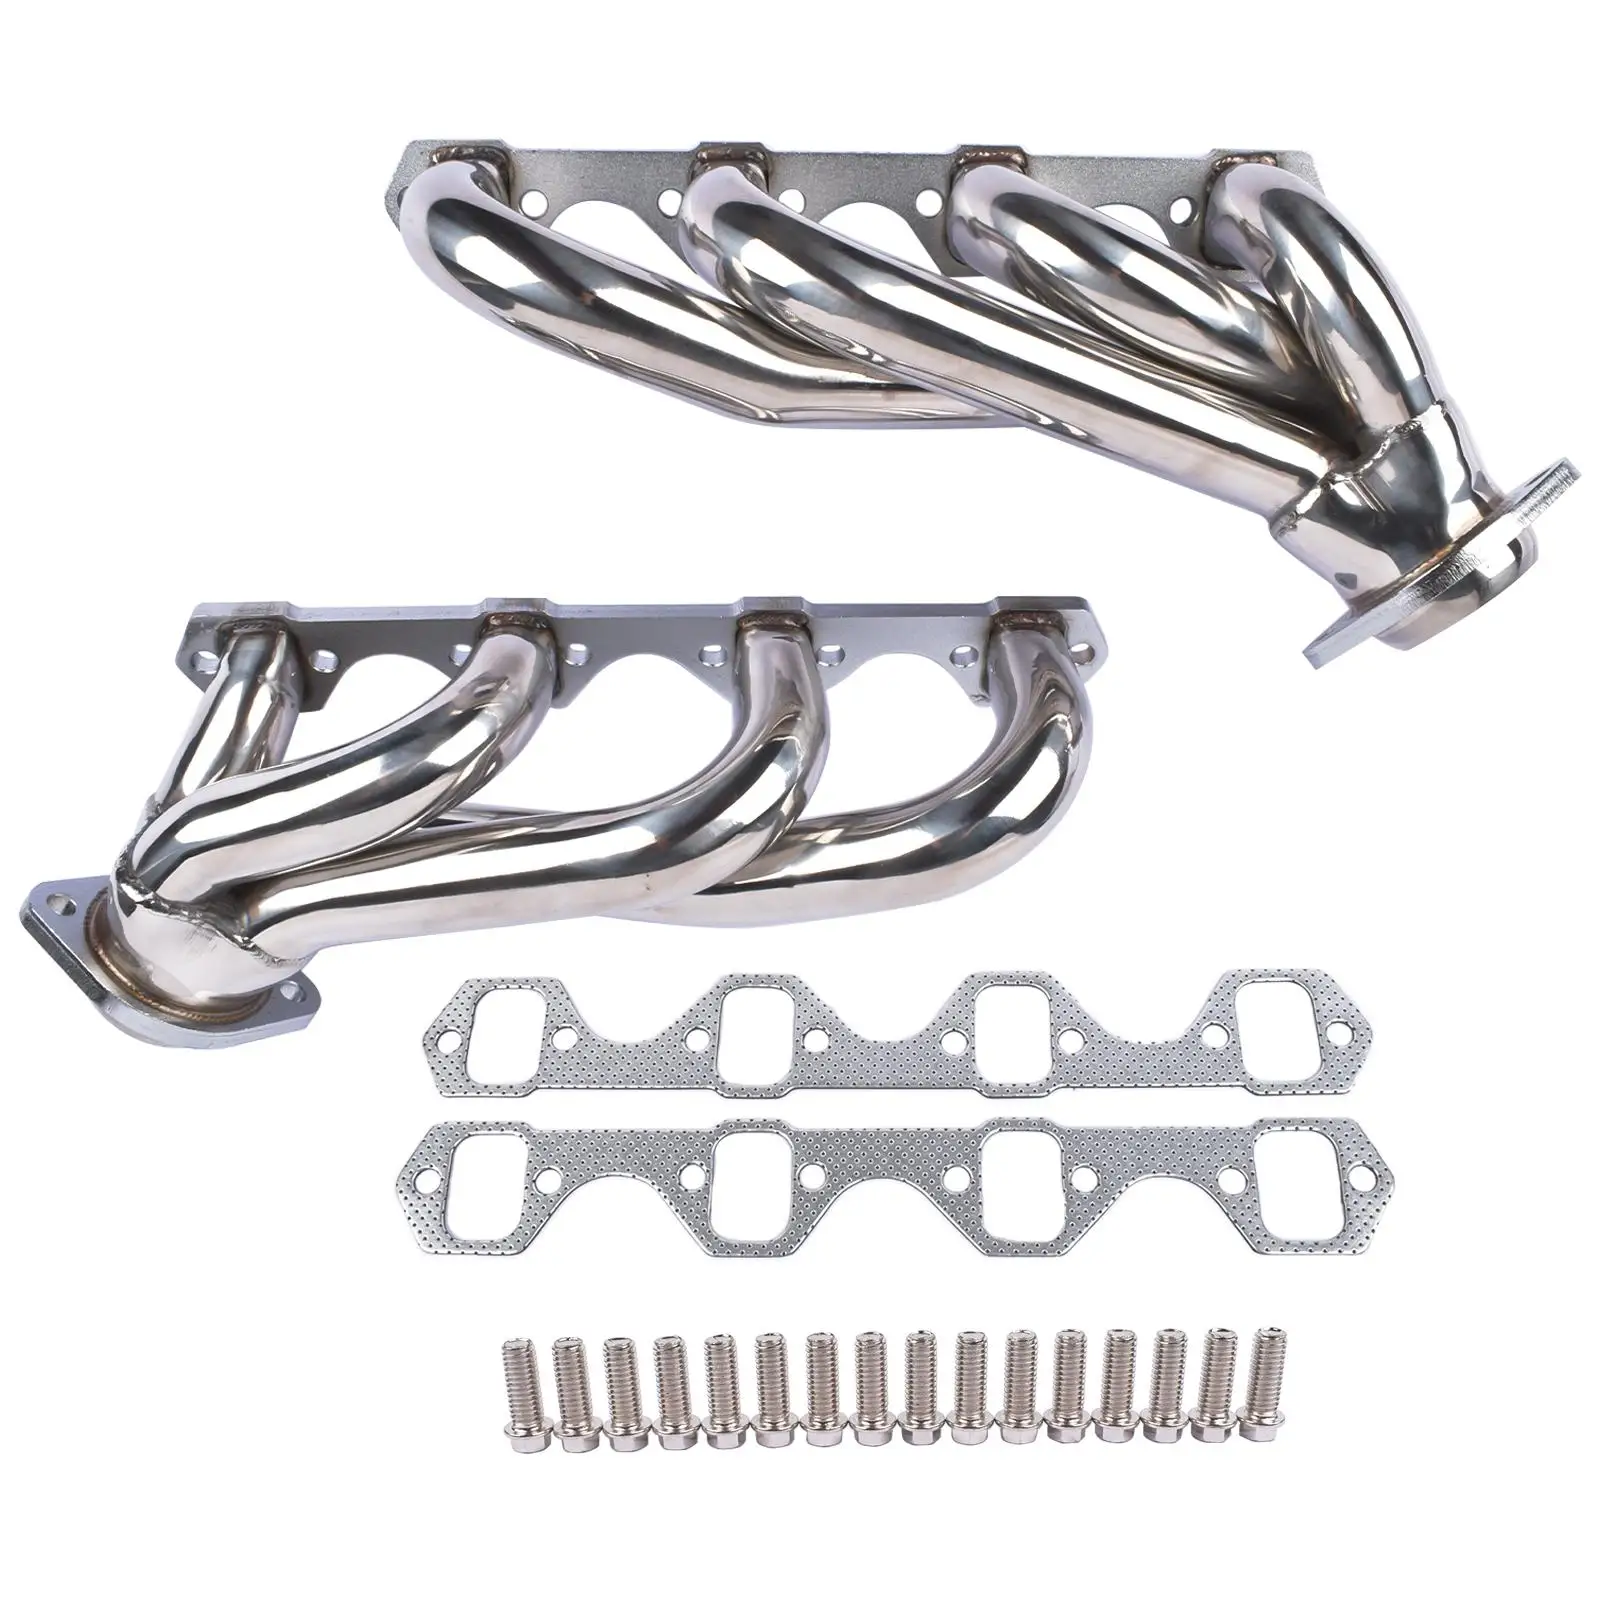 

AP03 Stainless steel Exhaust Manifold Headers For 1979-1993 Ford Mustang 5.0 V8 GT/LX/SVT